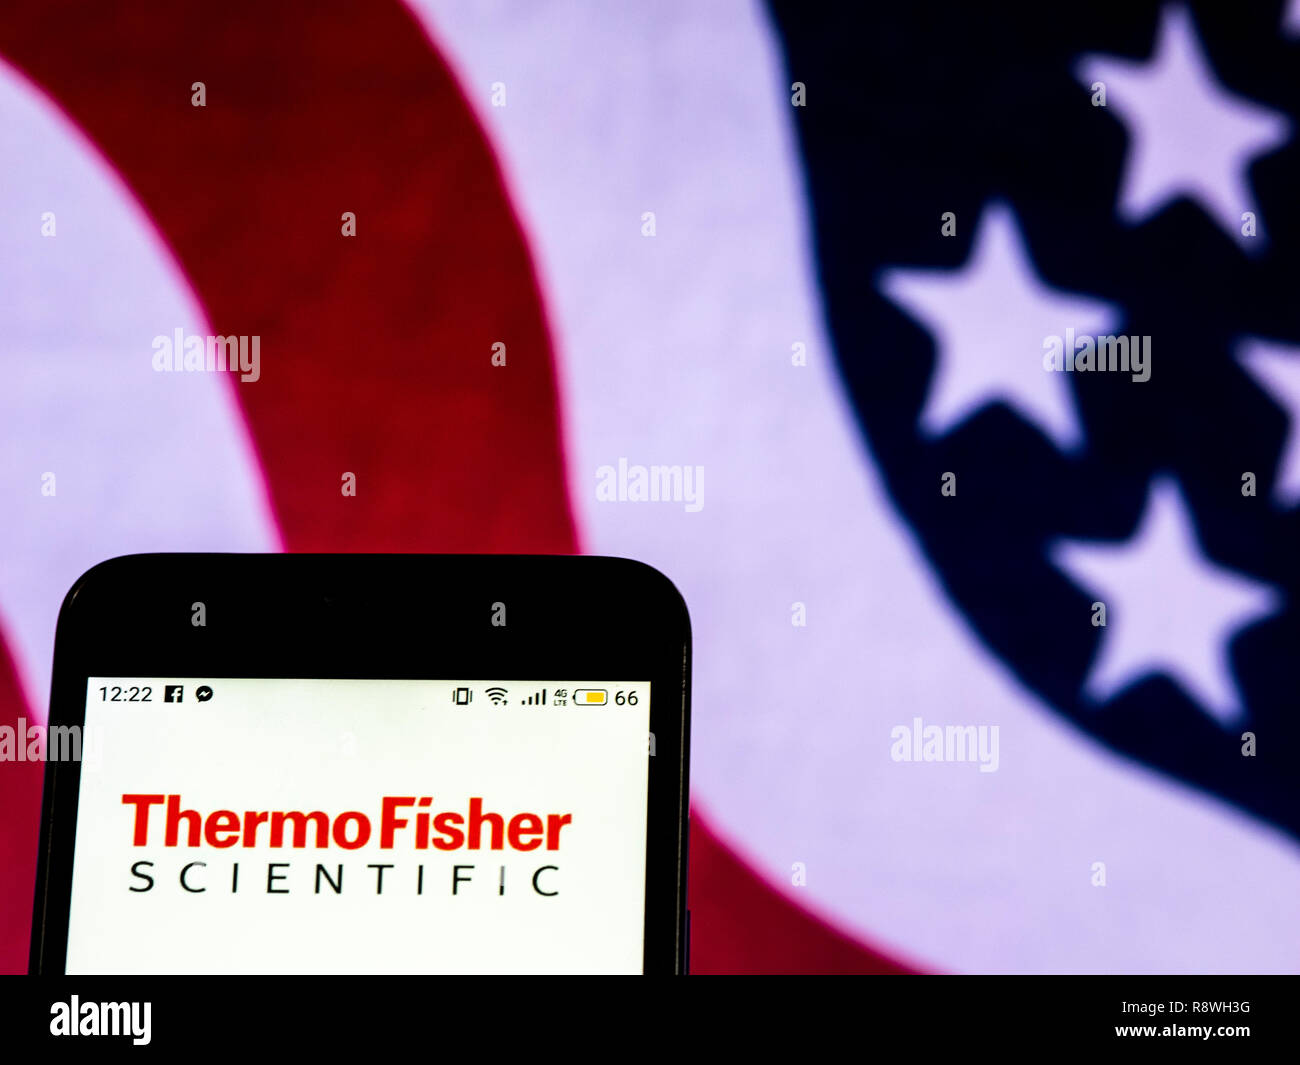 Thermo Fisher Scientific Company logo seen displayed on smart phone Stock Photo